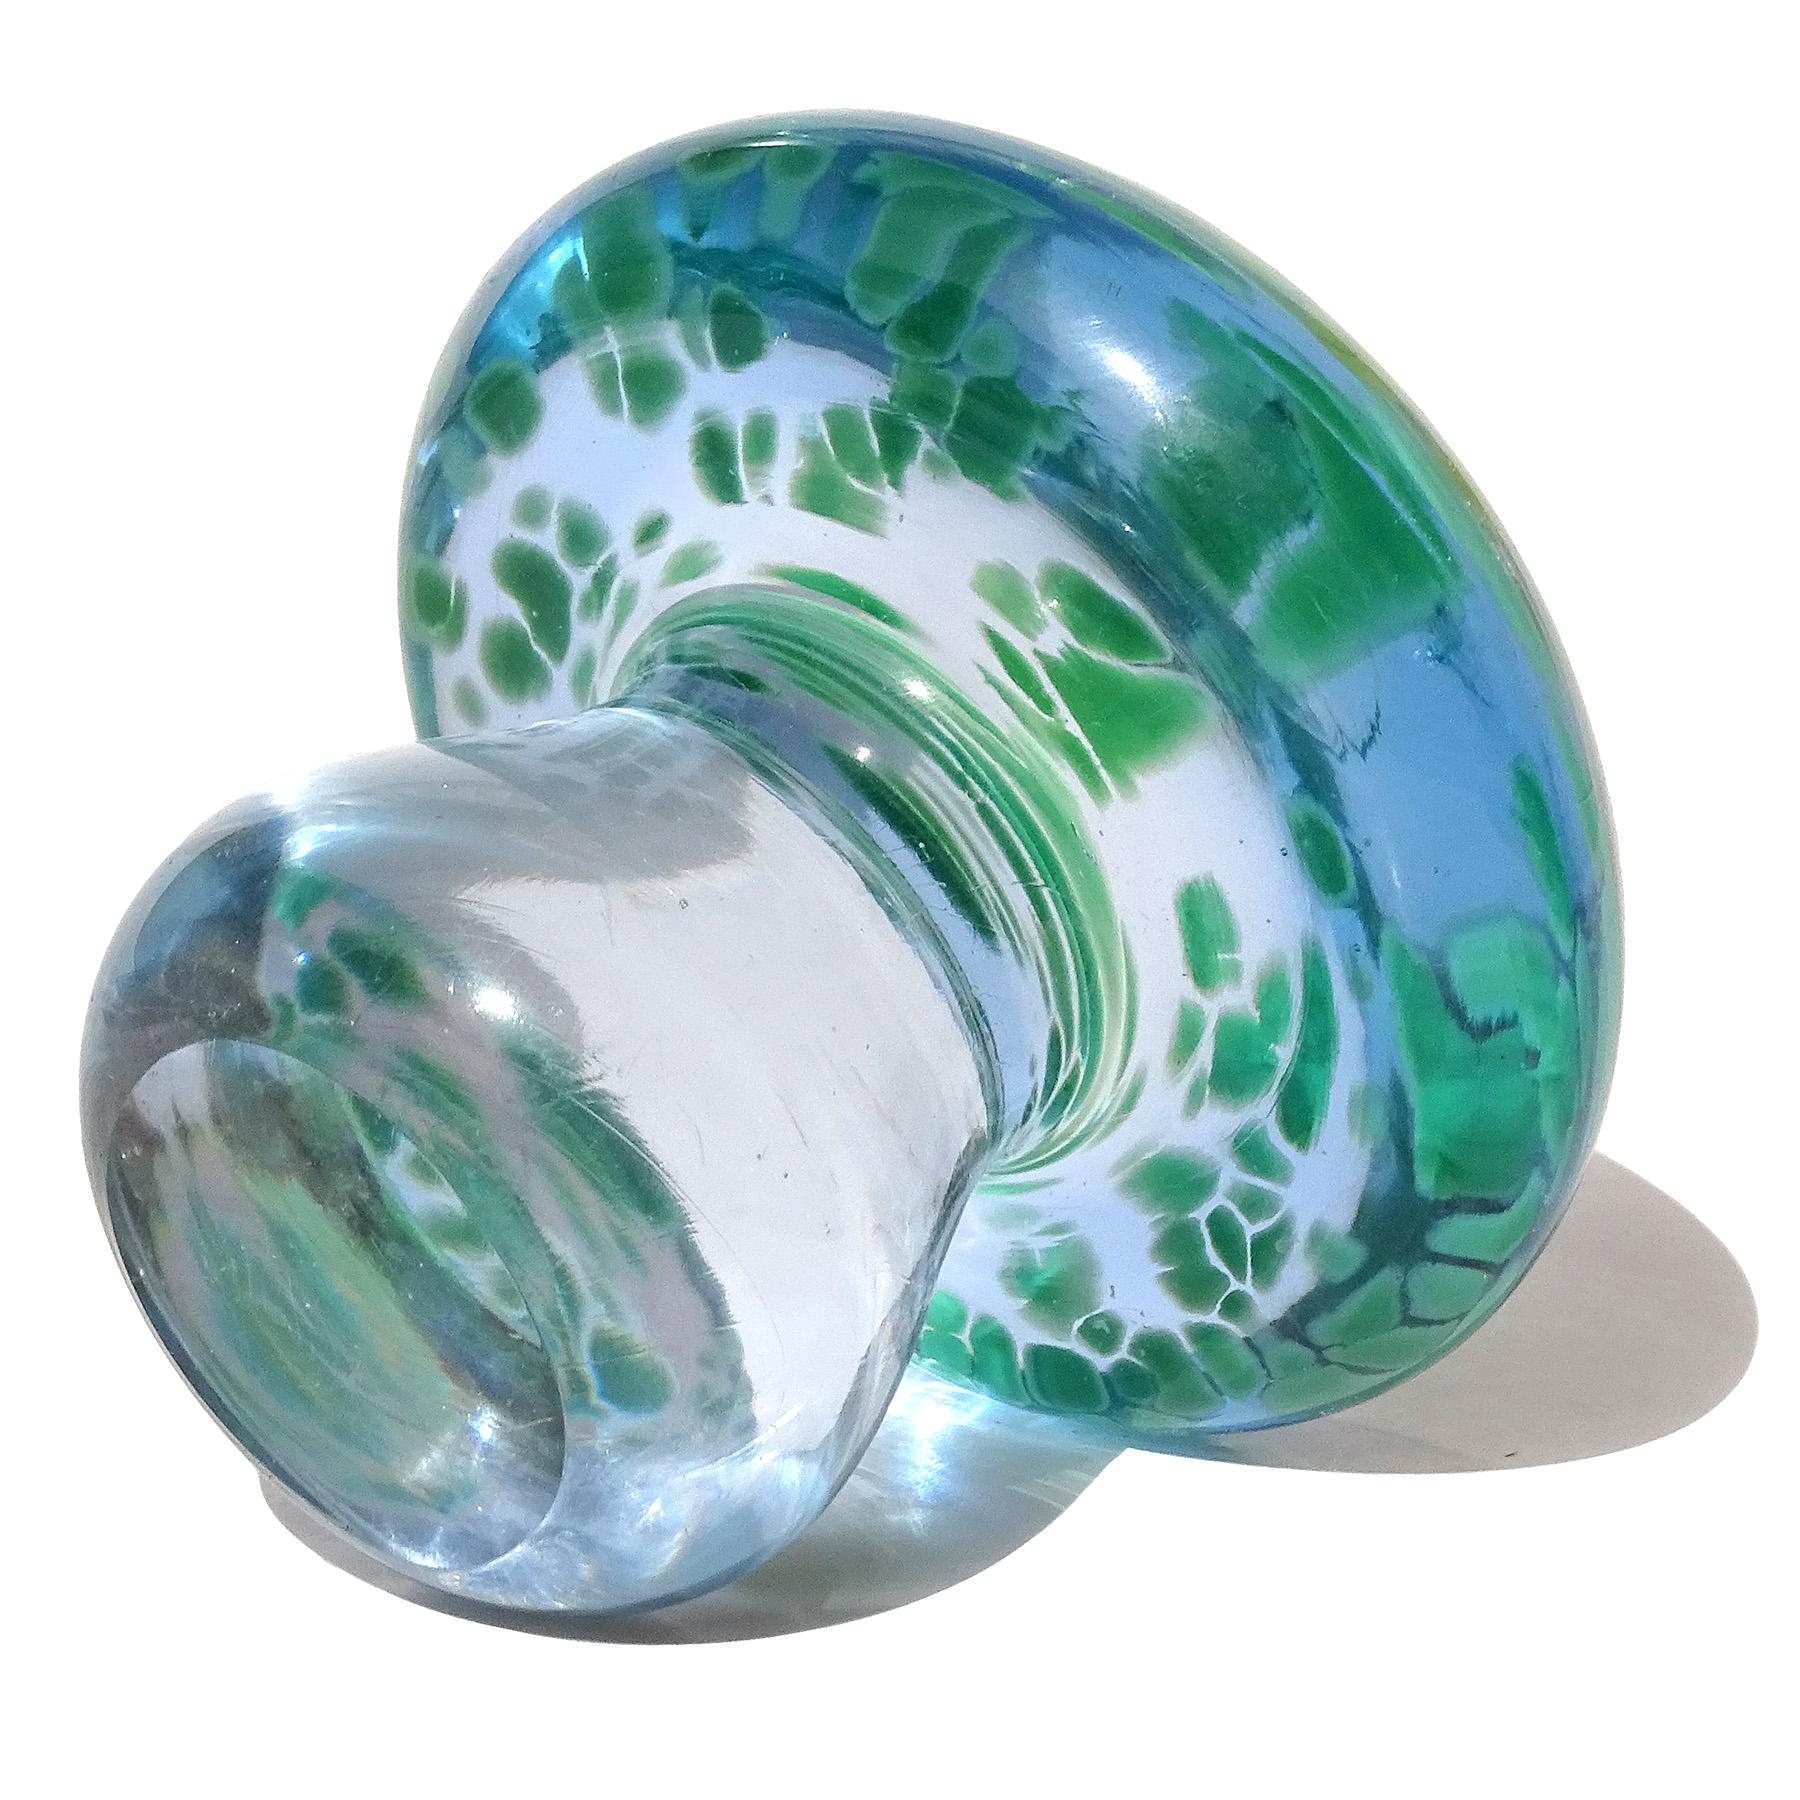 Hand-Crafted Murano Blue Green Italian Art Glass Mushroom Toadstool Paperweight Sculpture For Sale